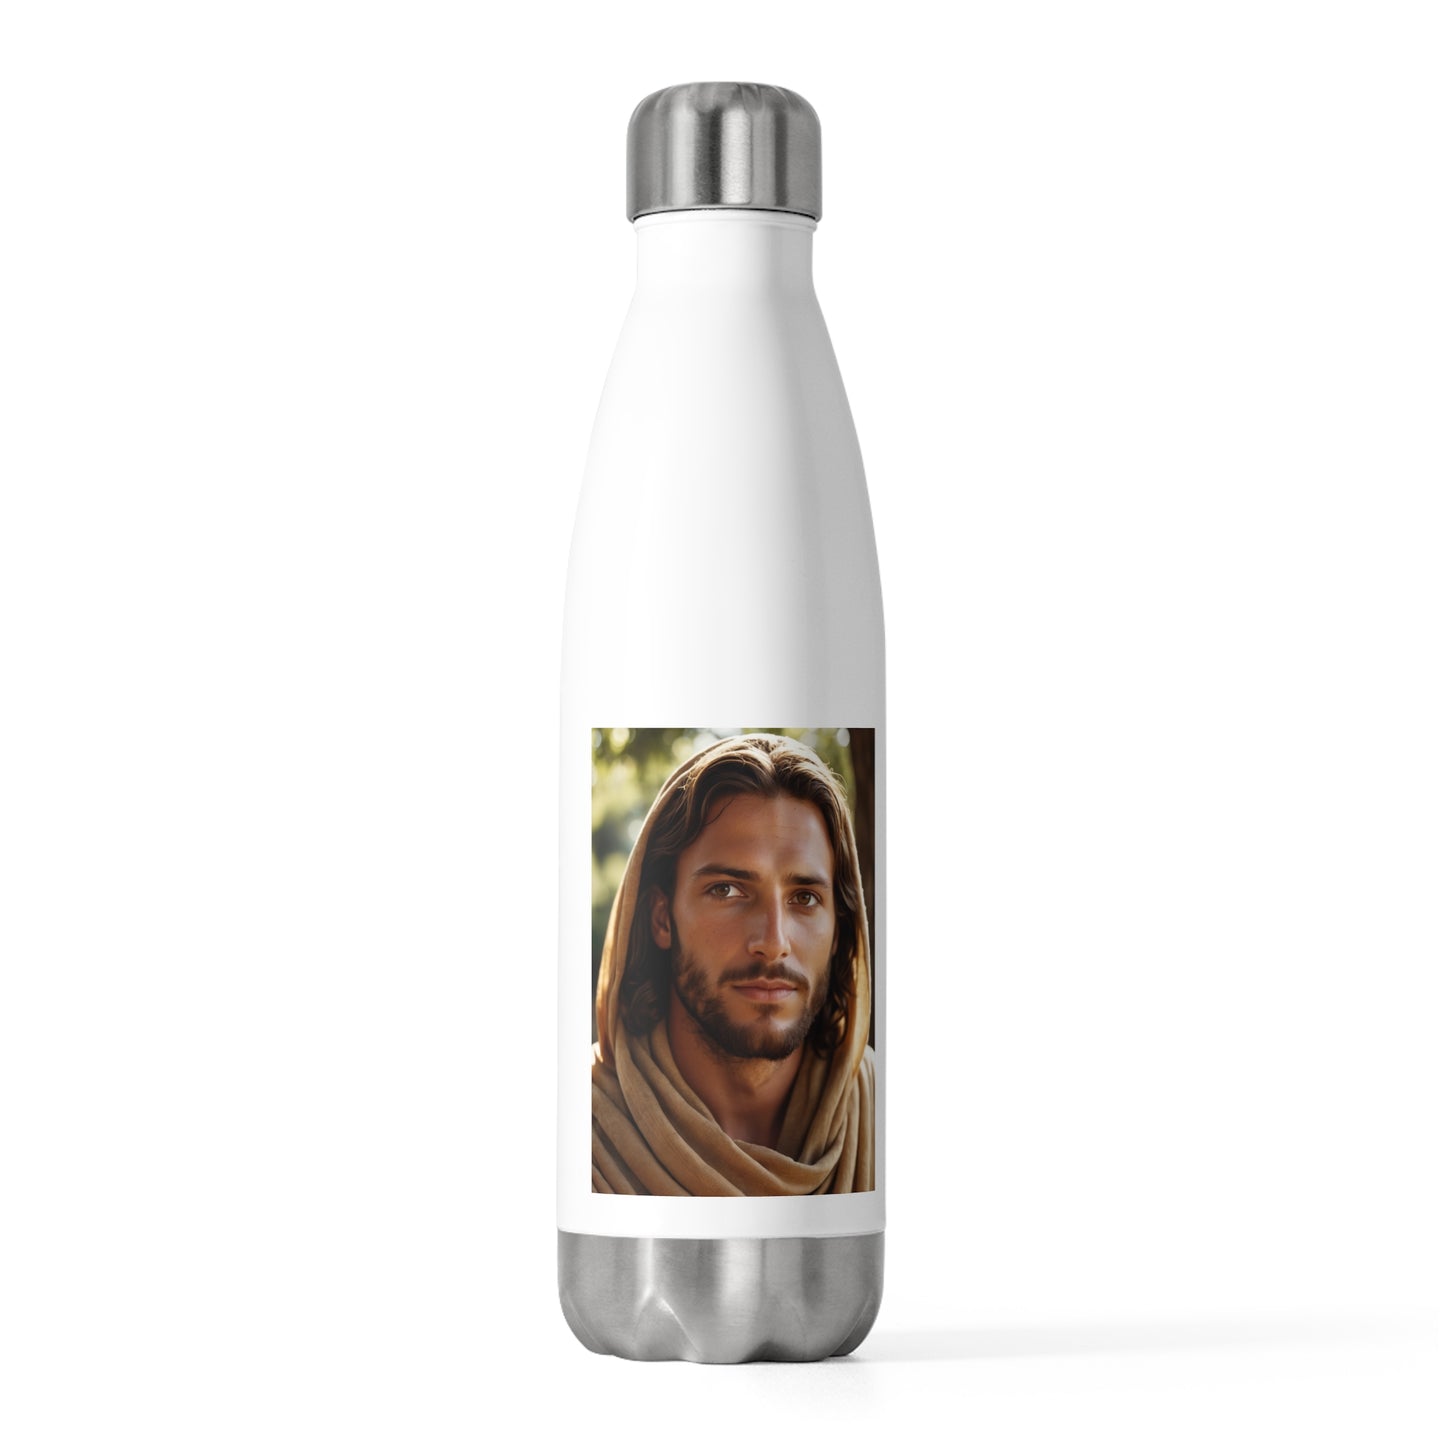 "Who do you say I that am" 20oz Insulated Bottle